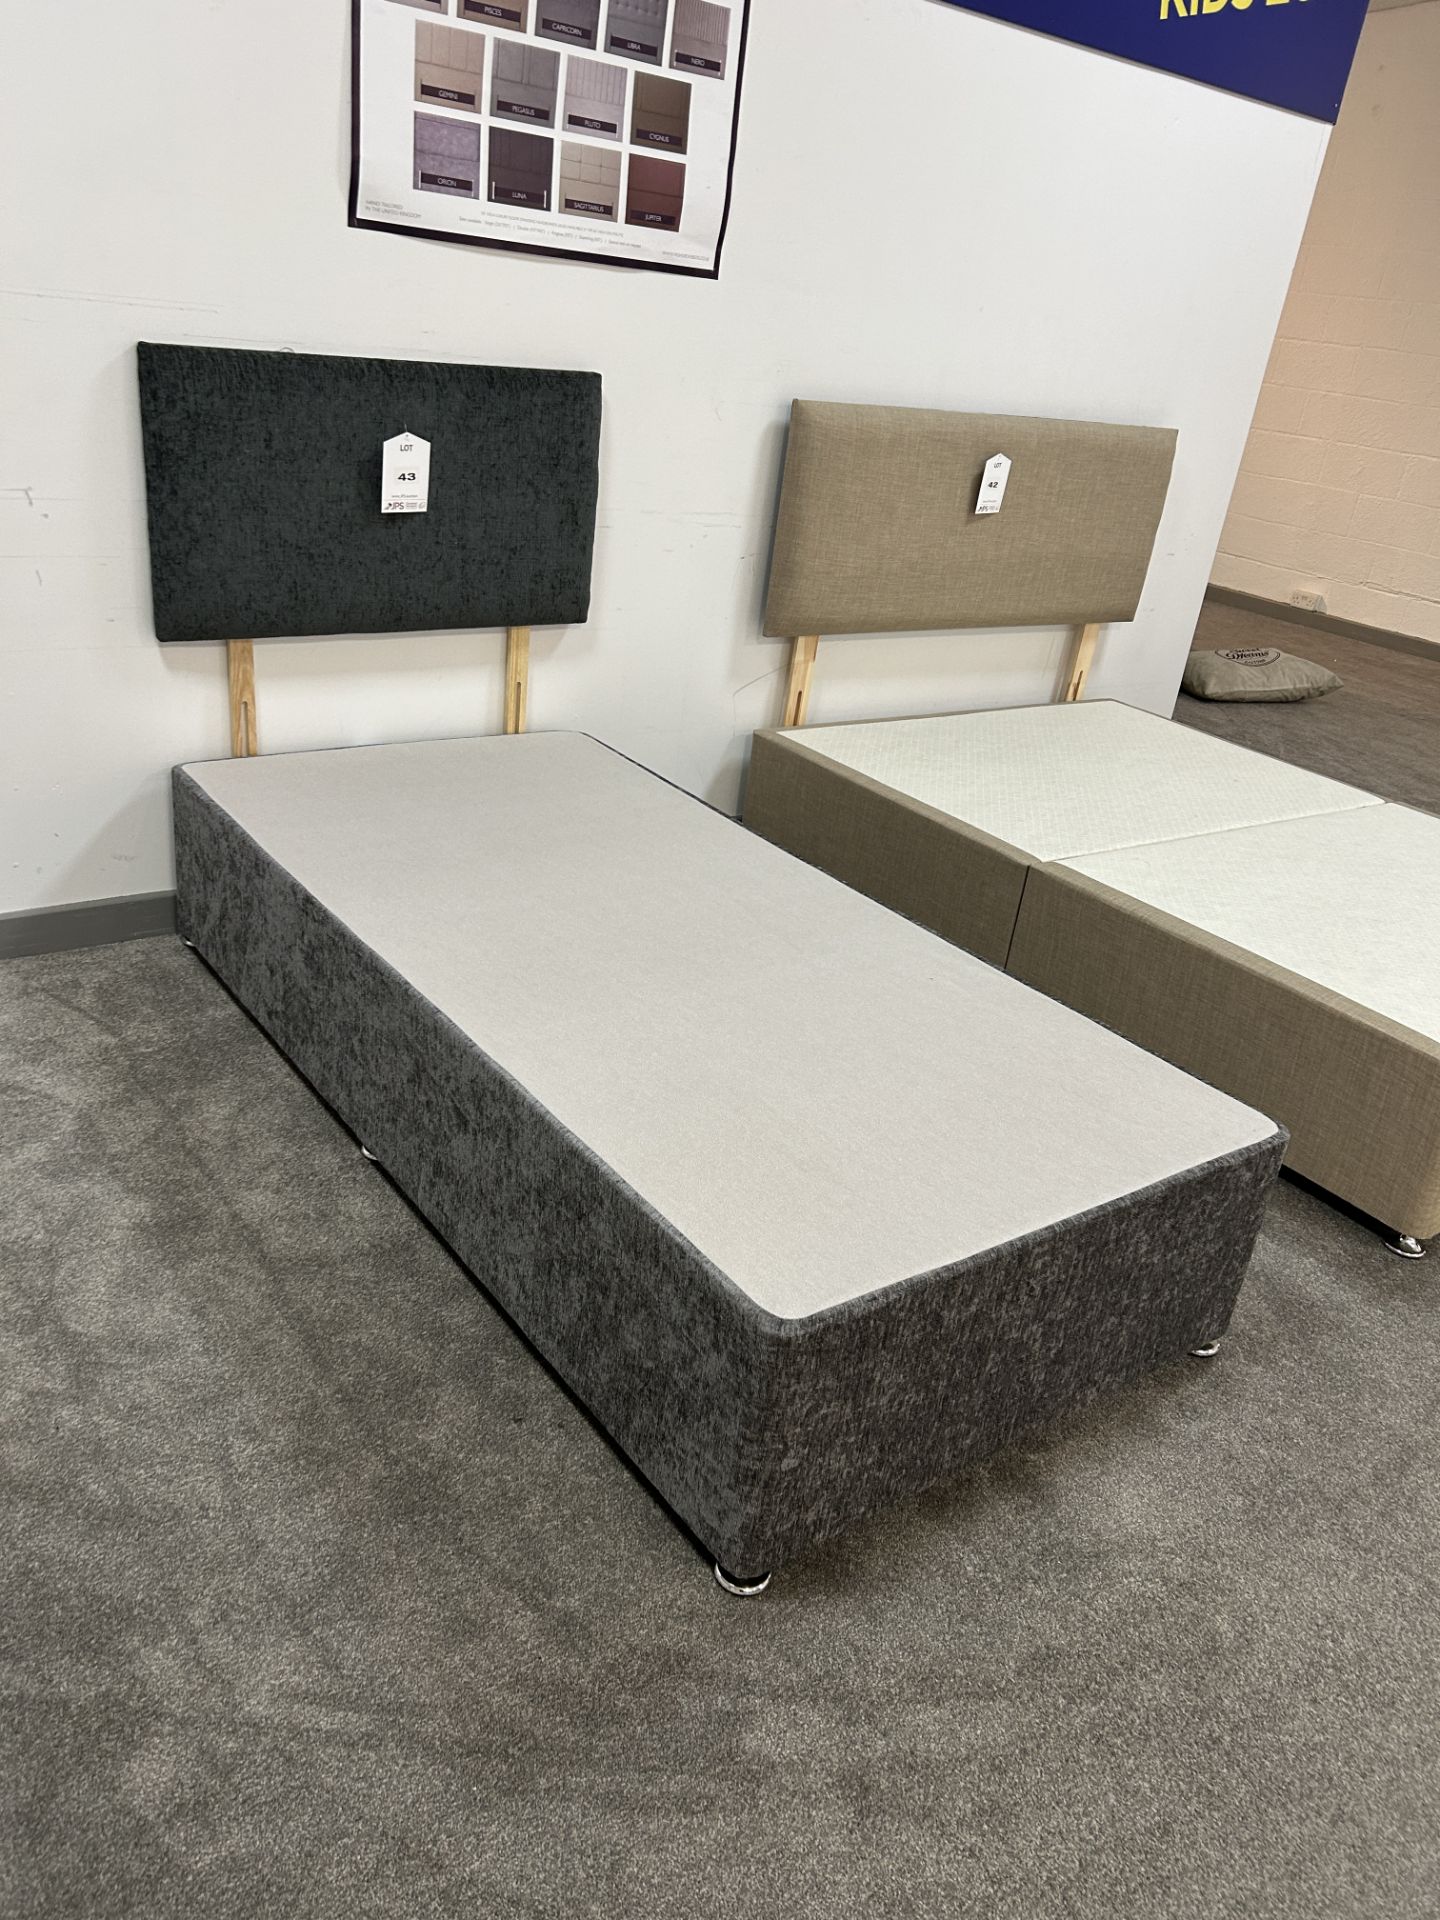 Ex-Display Single Size Bed Set incl: Base & Headboard in Scattered Grey - Image 3 of 4